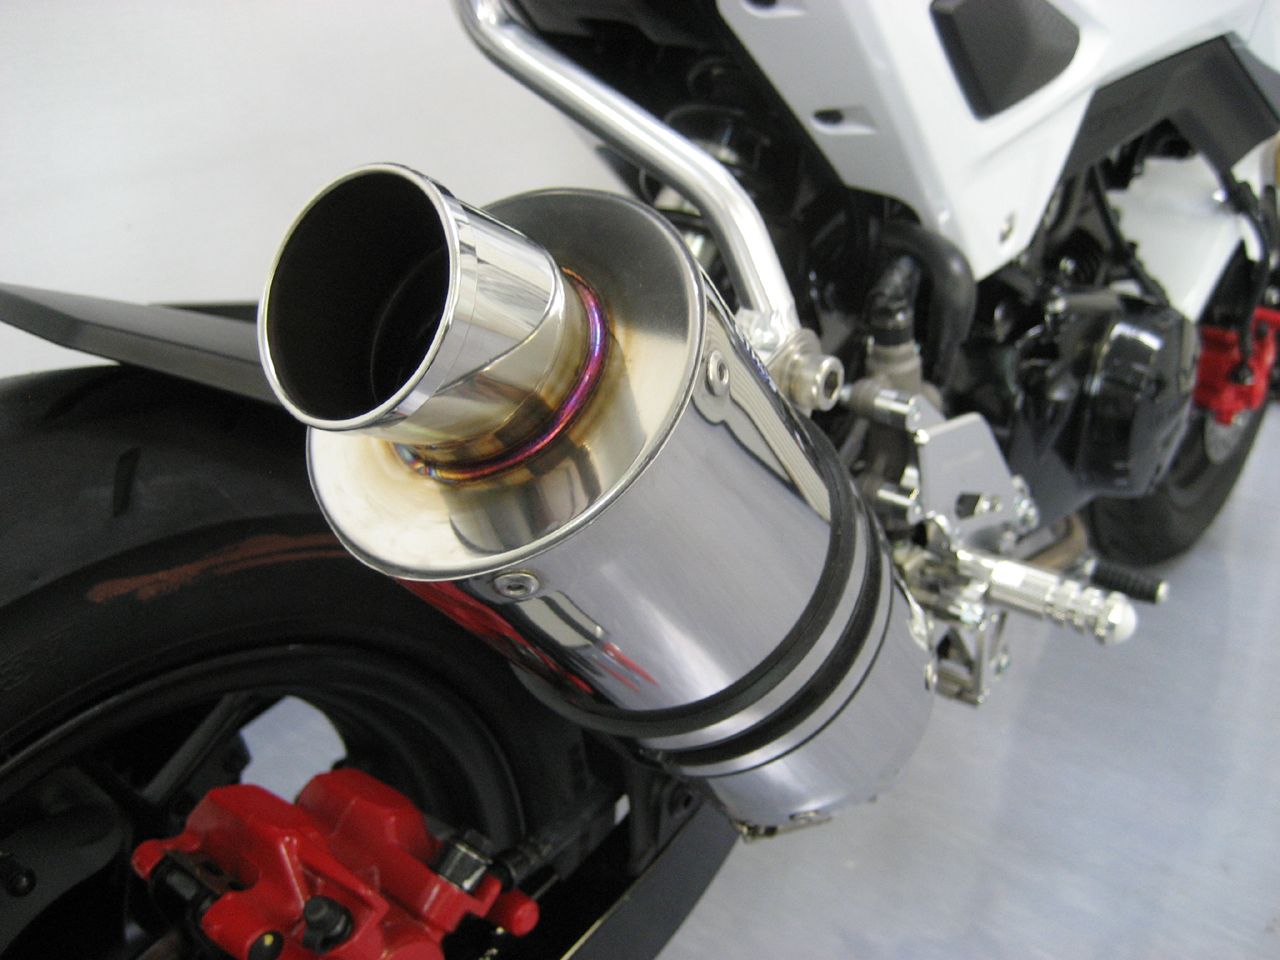 grom31280 - Corresponds to GROM Cup! A New Slip-on Exhaust for MSX125(GROM)!